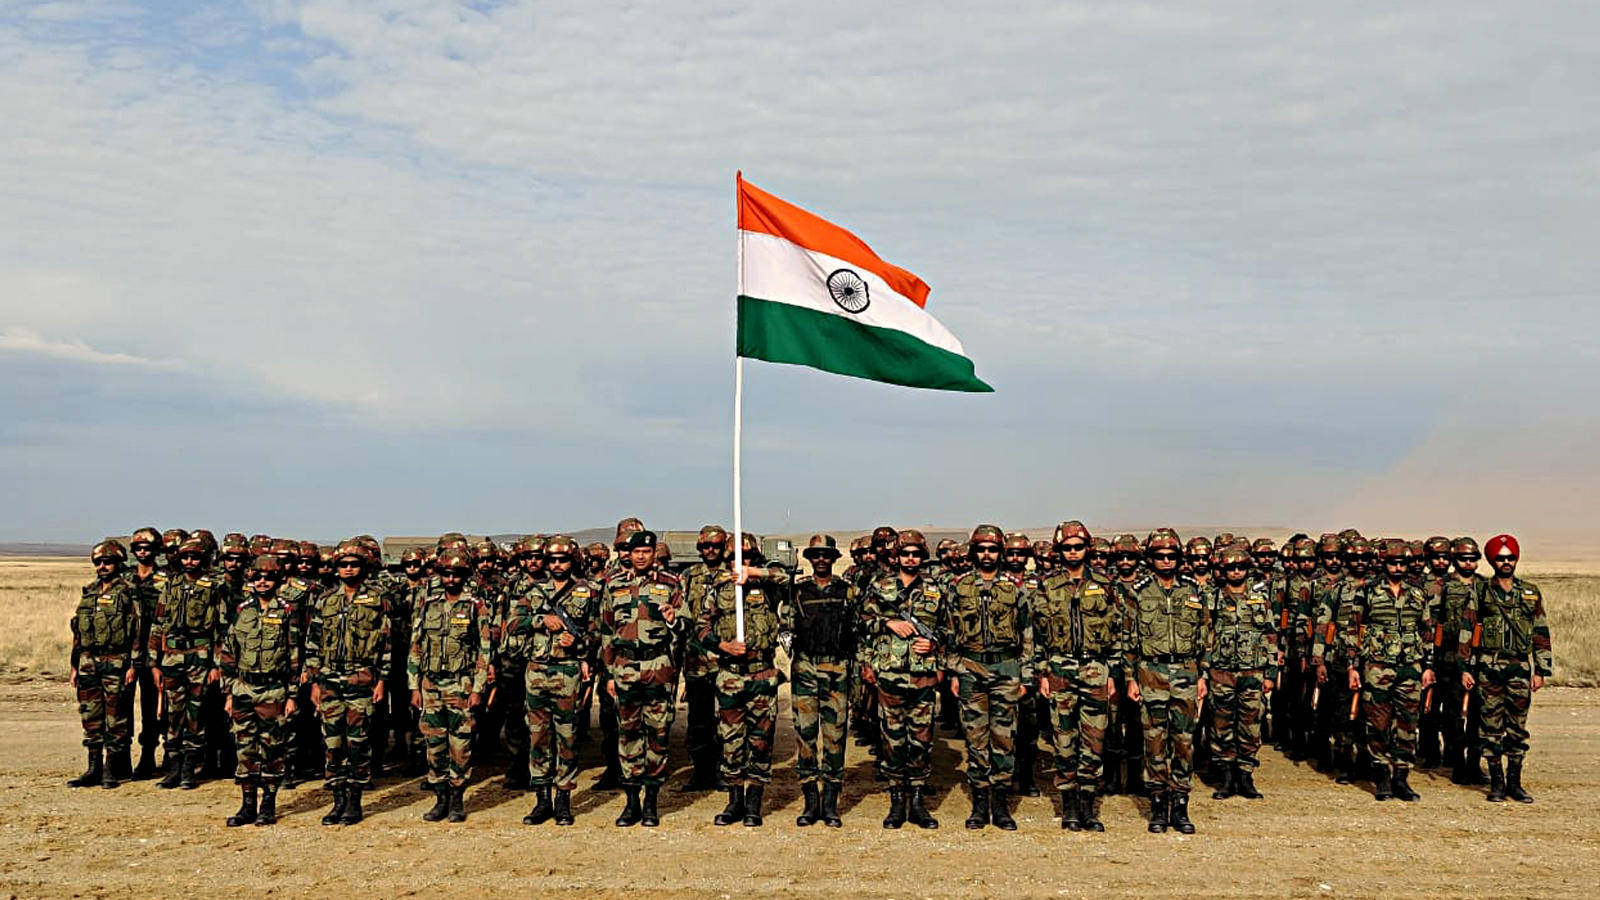 Free Indian Army Wallpaper Downloads, Indian Army Wallpaper for FREE